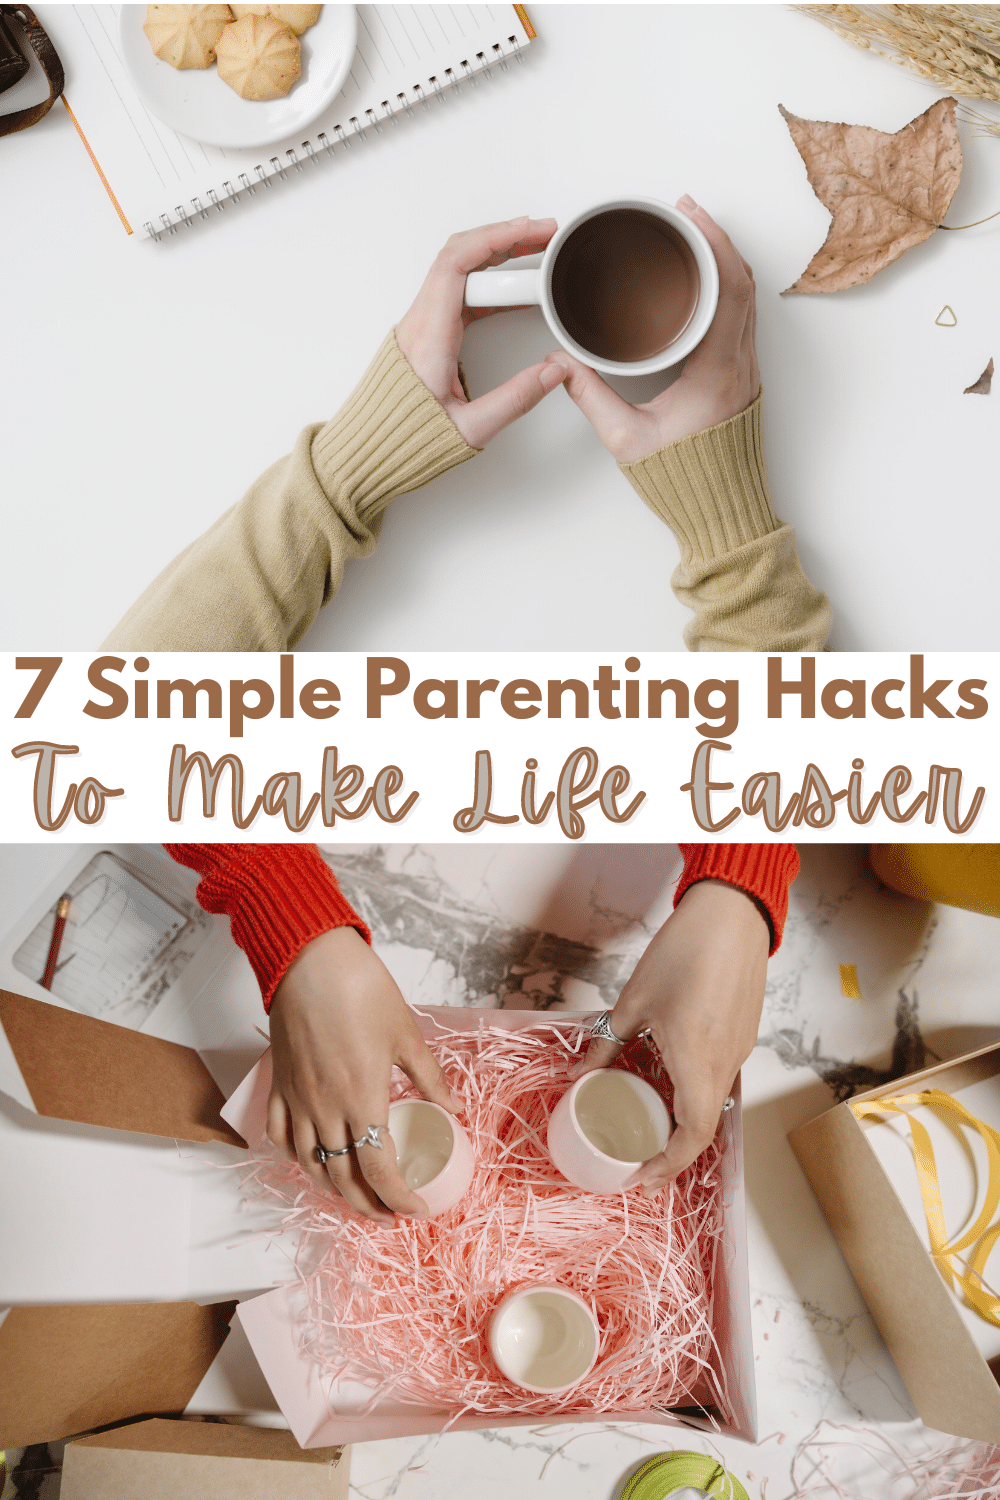 Here are 7 simple parenting hacks to help make your parenting life a little bit easier. I hope these parenting tips help you feel like a superhero mom. #parentinghacks #parentingtips #busymom #parenting via @wondermomwannab